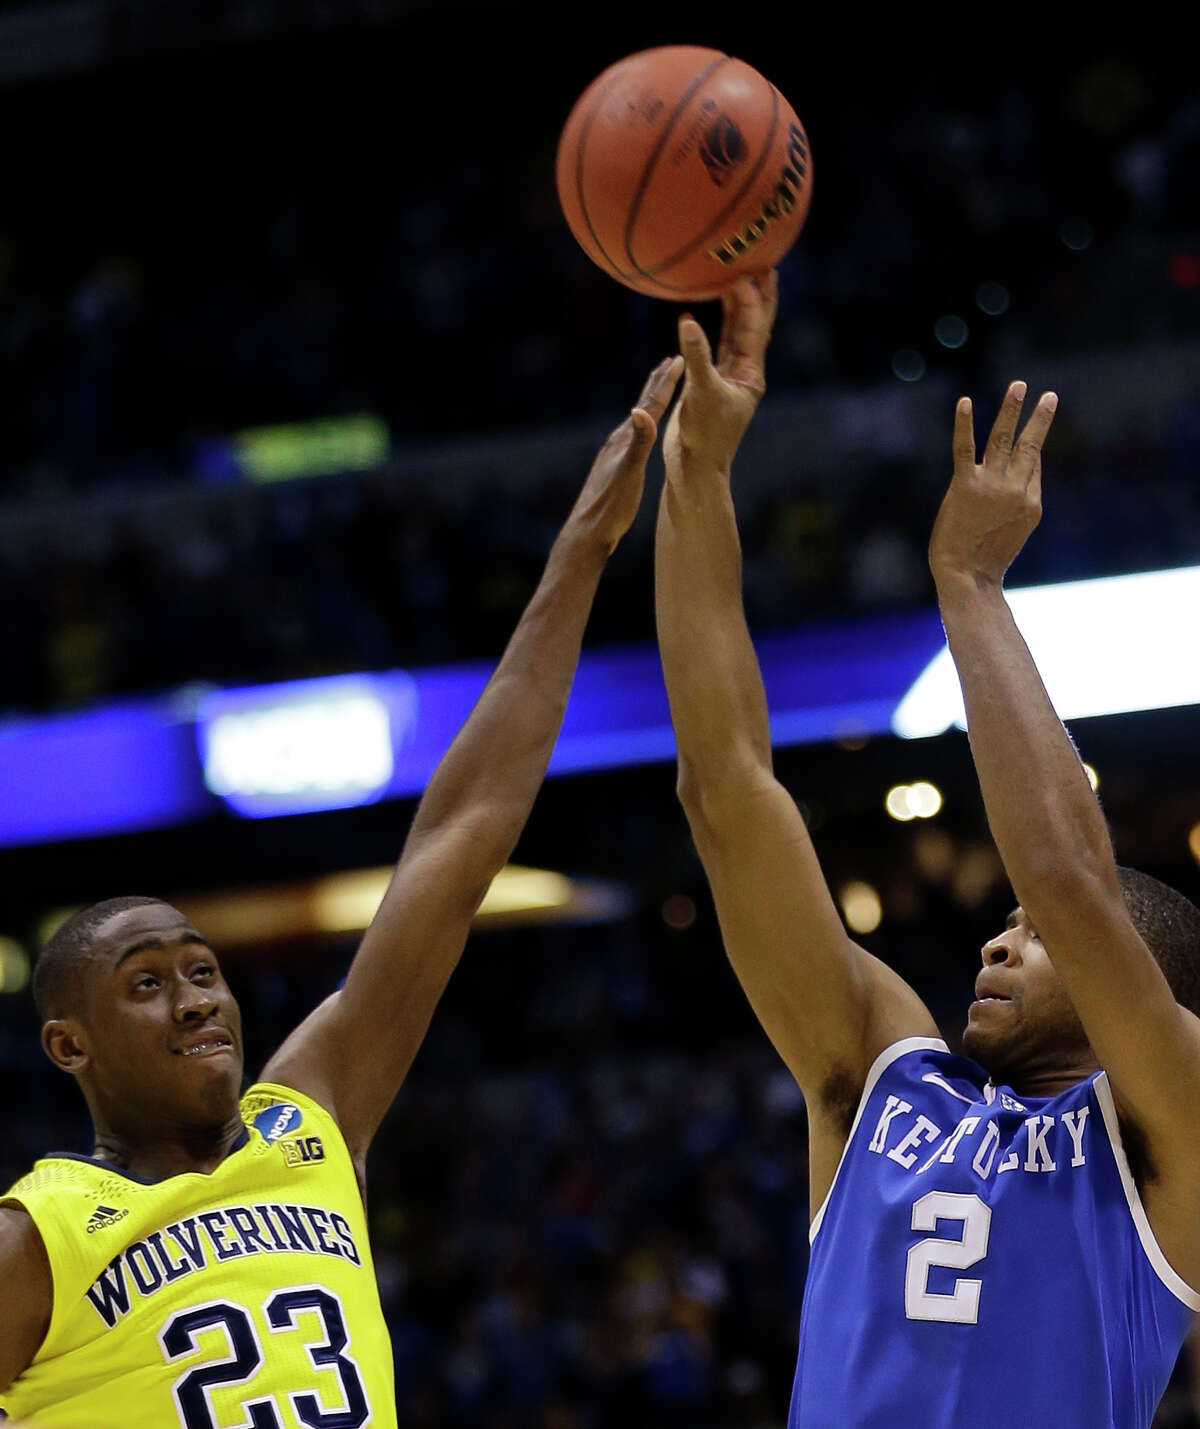 Kentucky's Aaron Harrison gets off his game-winning 3-pointer under pressure from Caris LeVert.